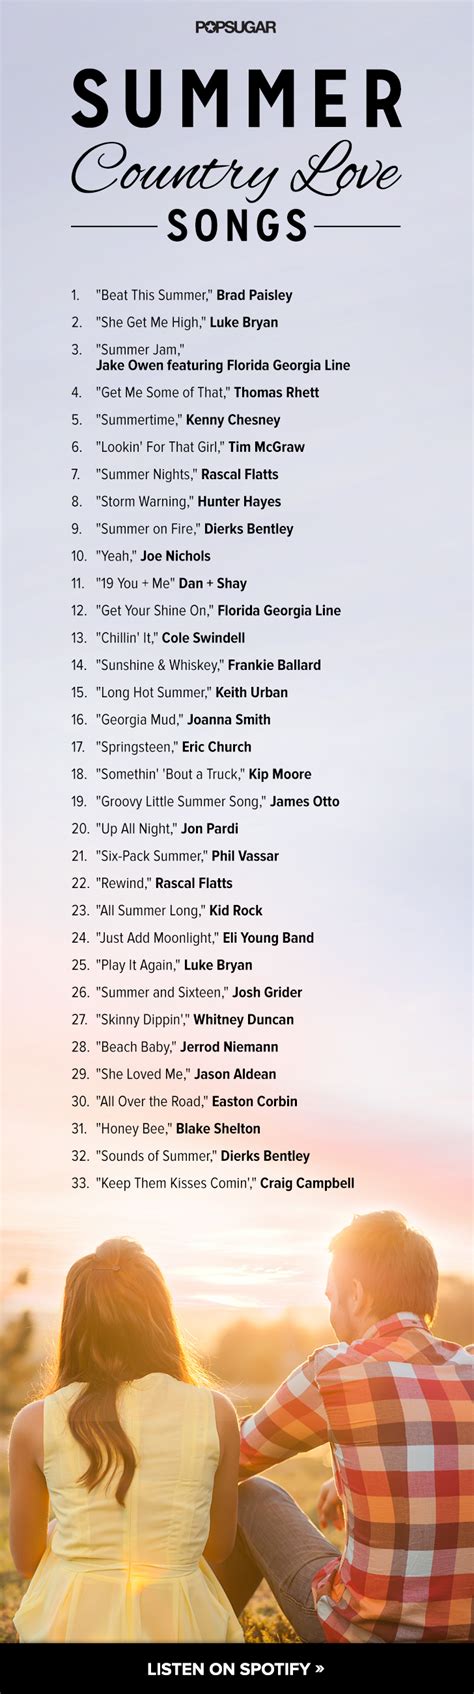 Country Love Songs Playlists Popsugar Love And Sex